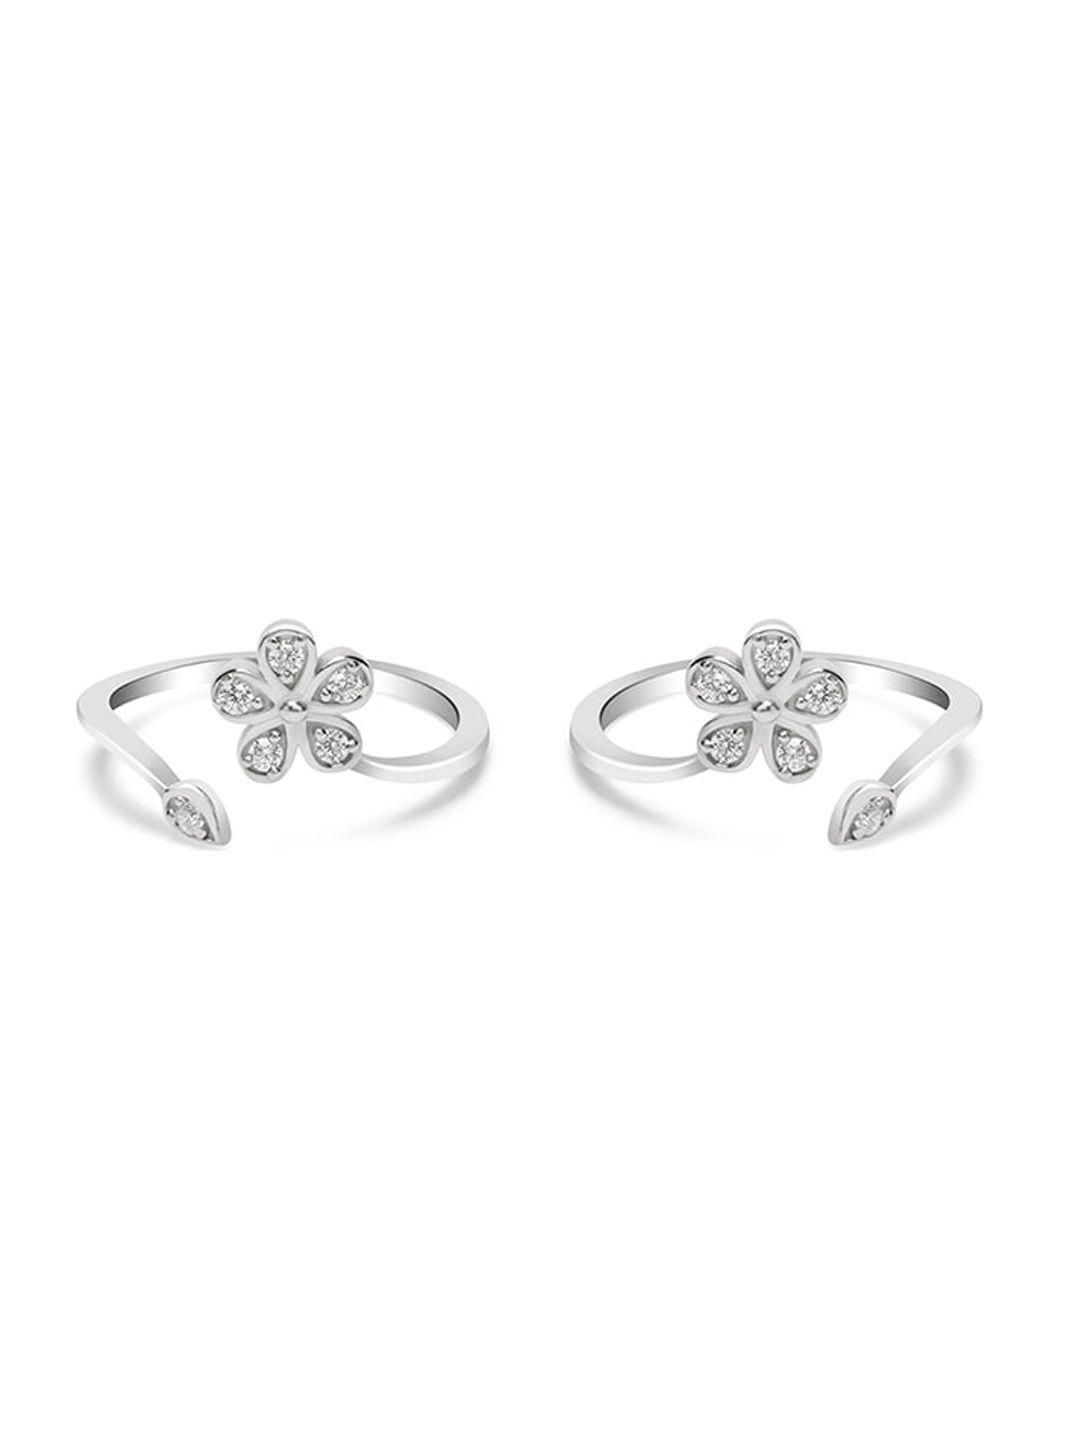 march-by-fablestreet-925-sterling-silver-rhodium-plated-cz-studded-oxidized-toe-rings